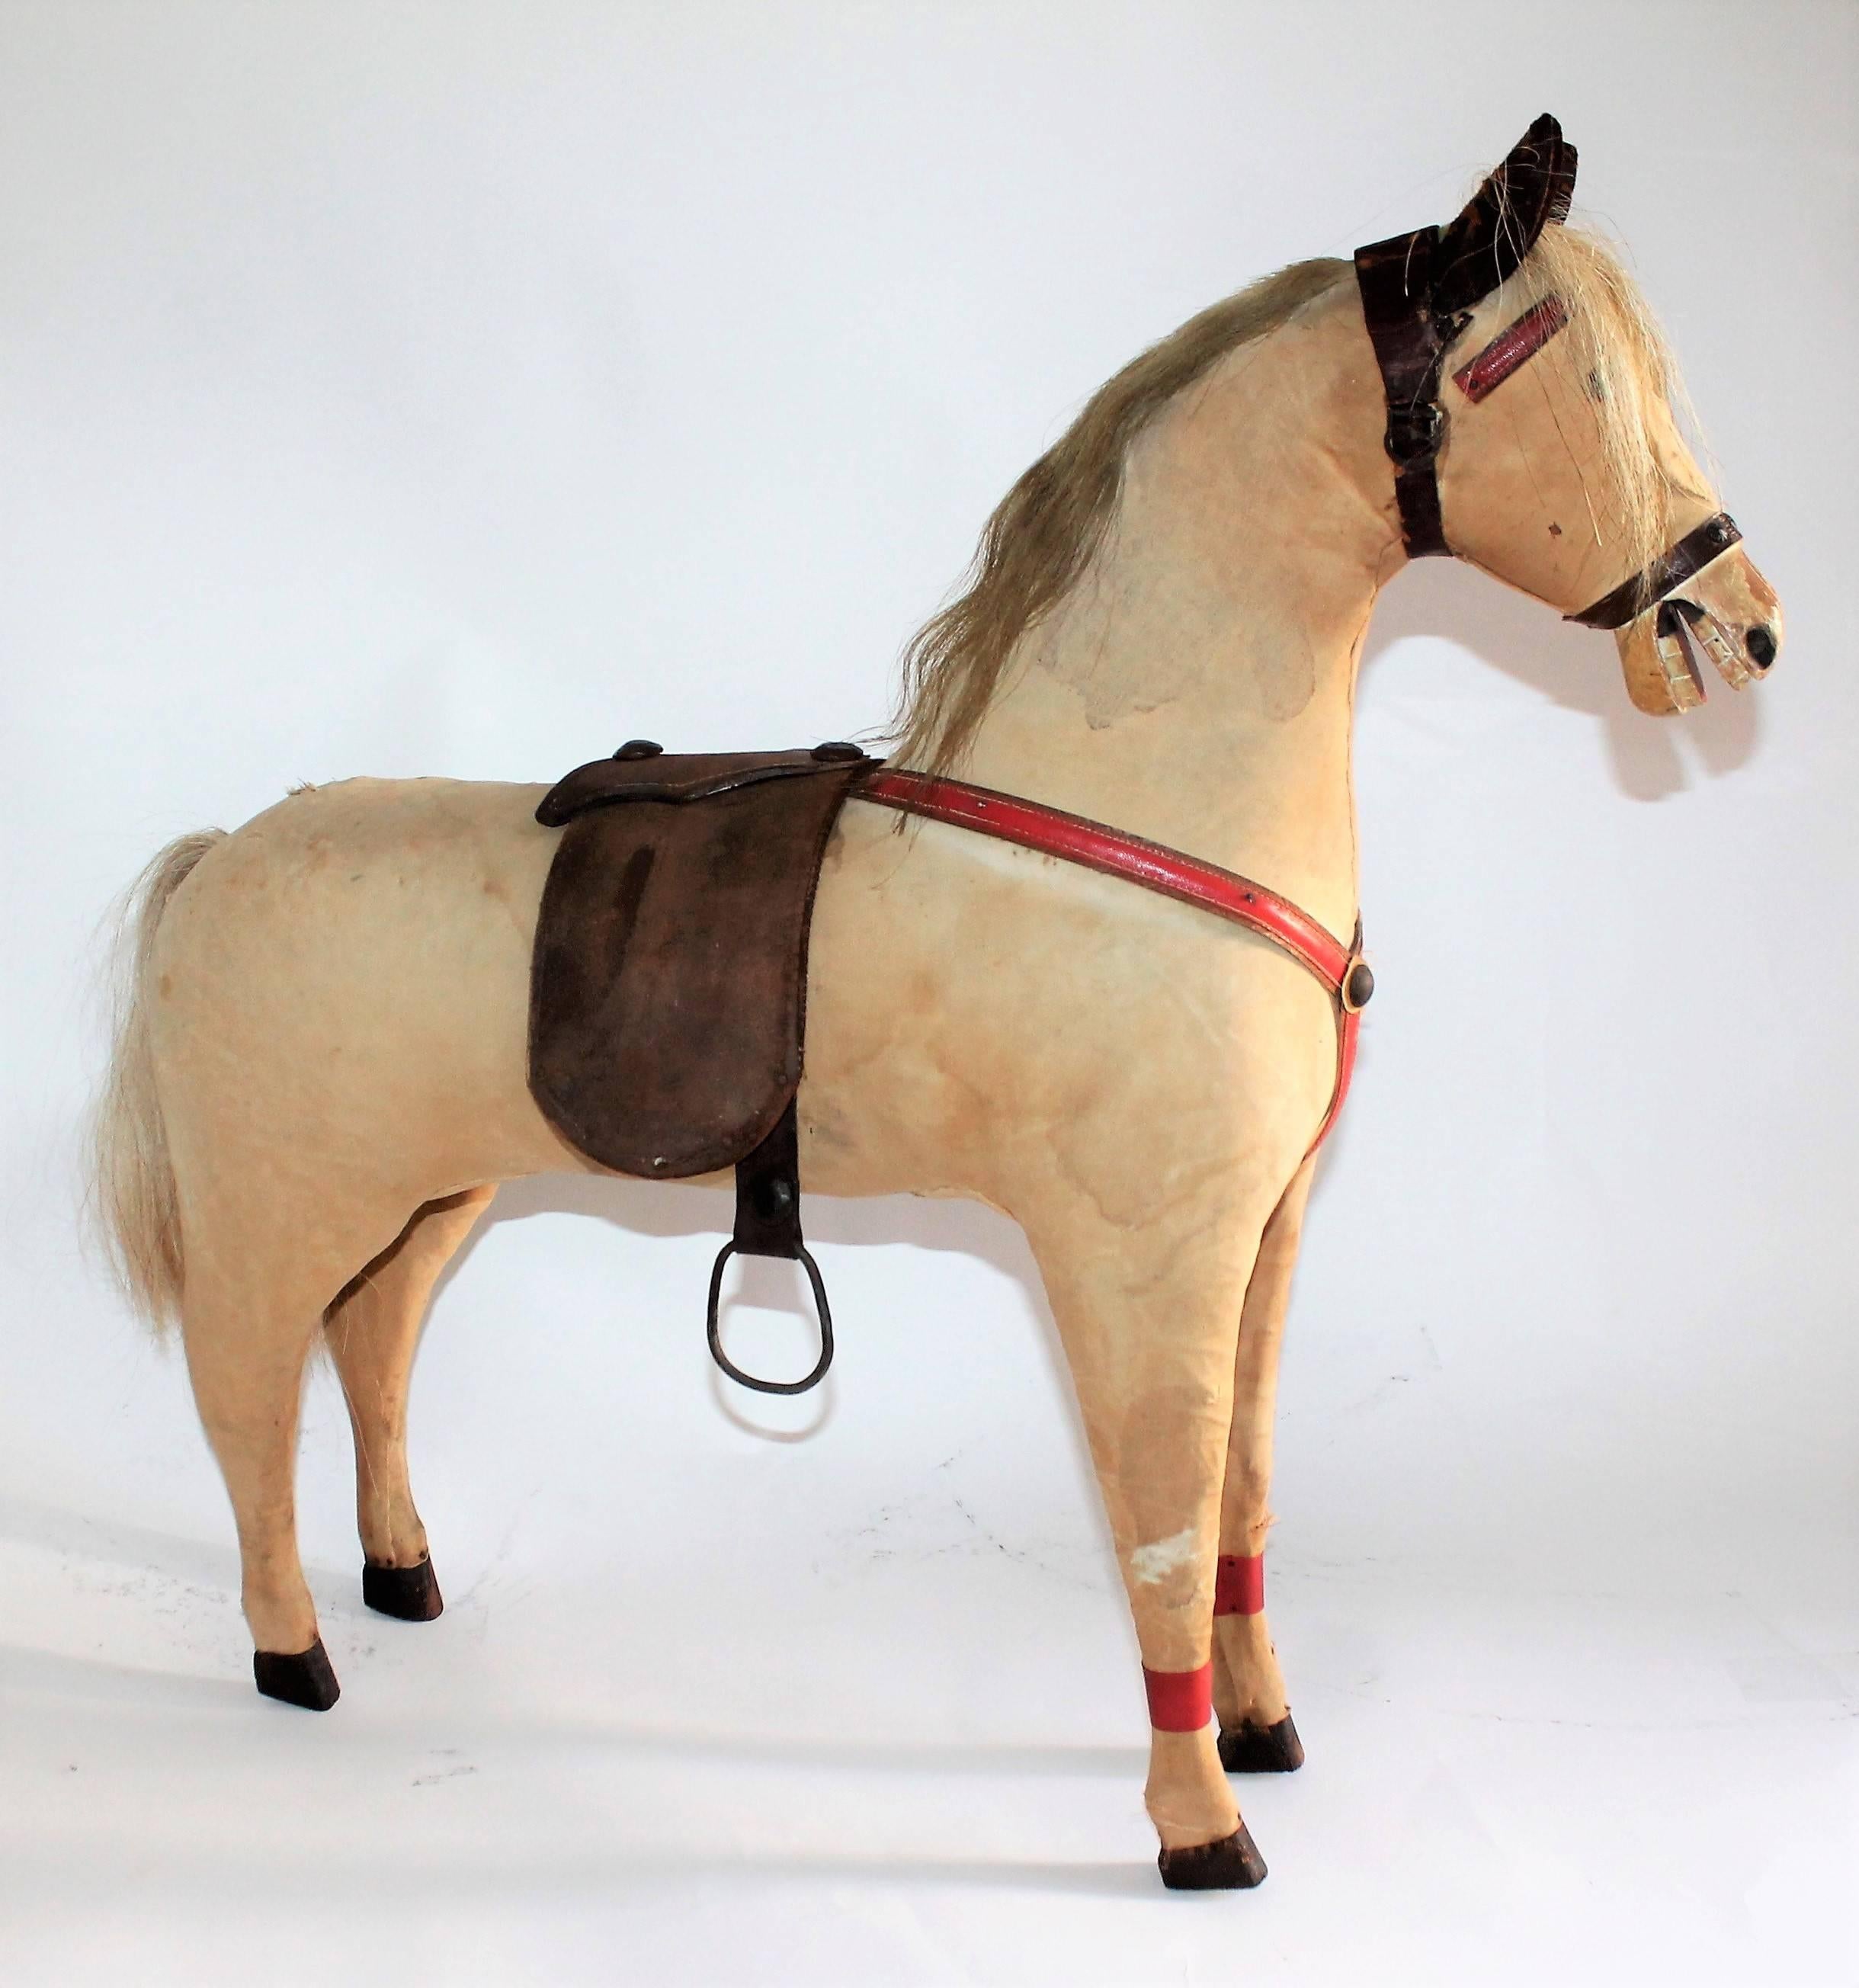 This fine example of Folk Art horse is from a huge monumental rocking horse with out the big rockers from the base. We like it better with out as it is more folky and a great Primitive presents. This horse is covered by the original canvas and